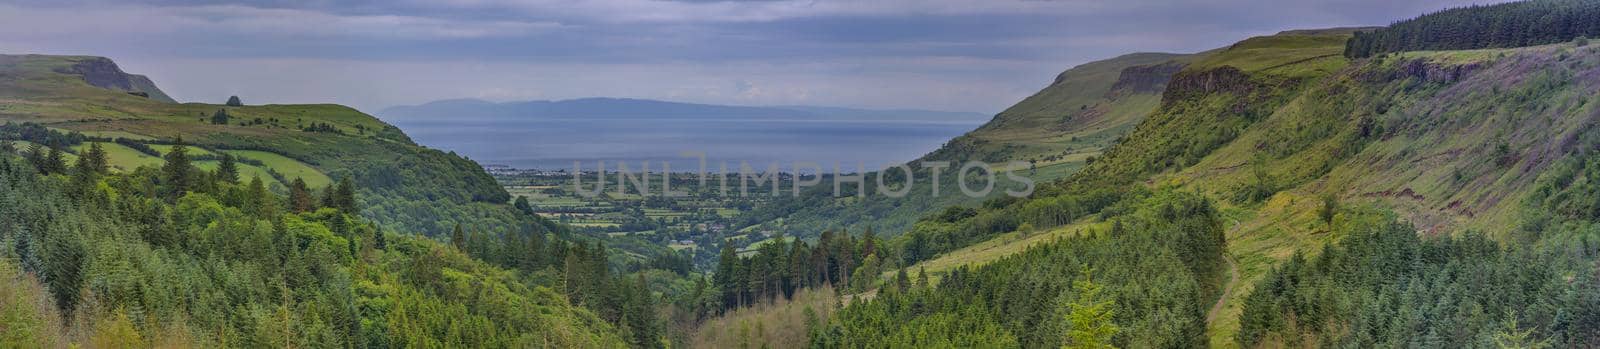 Glenariff known as Queens of the Glens and the biggest of the nine Glens of Antrim, County Antrim, Northern Ireland, UK by zhu_zhu